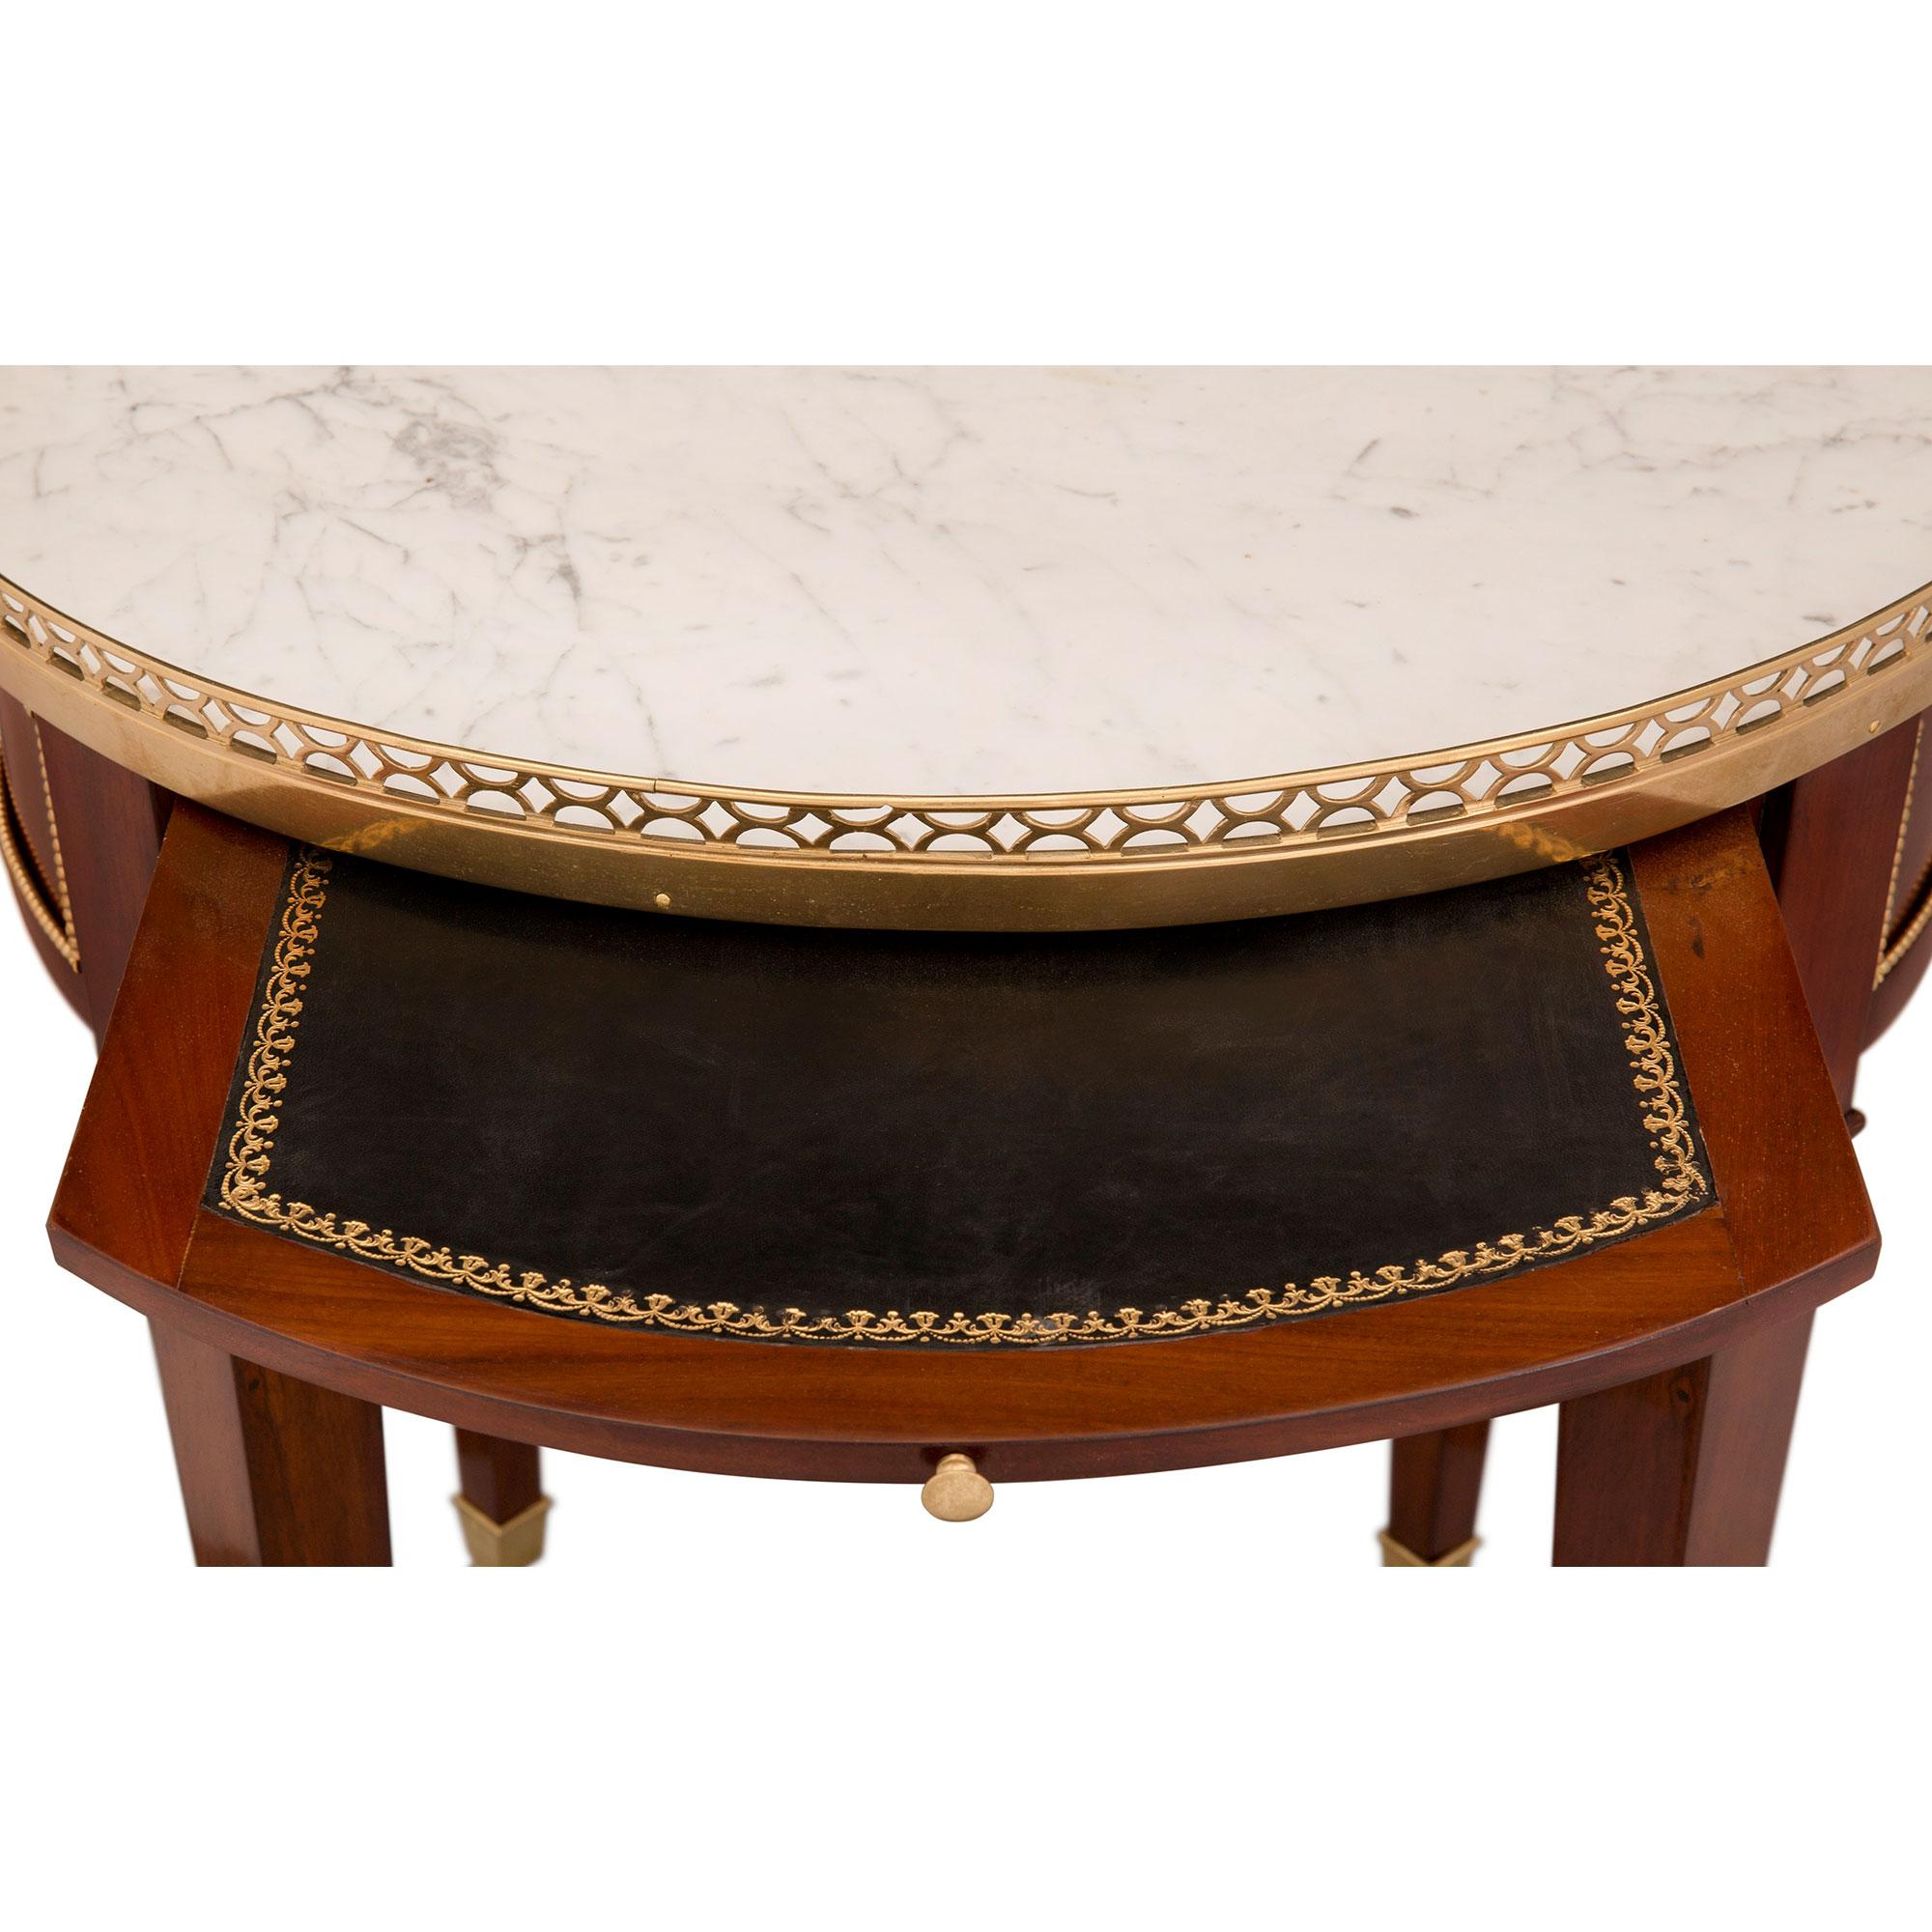 Ormolu French 18th Century Louis XVI Style Mahogany and Carrara Marble Side Table For Sale